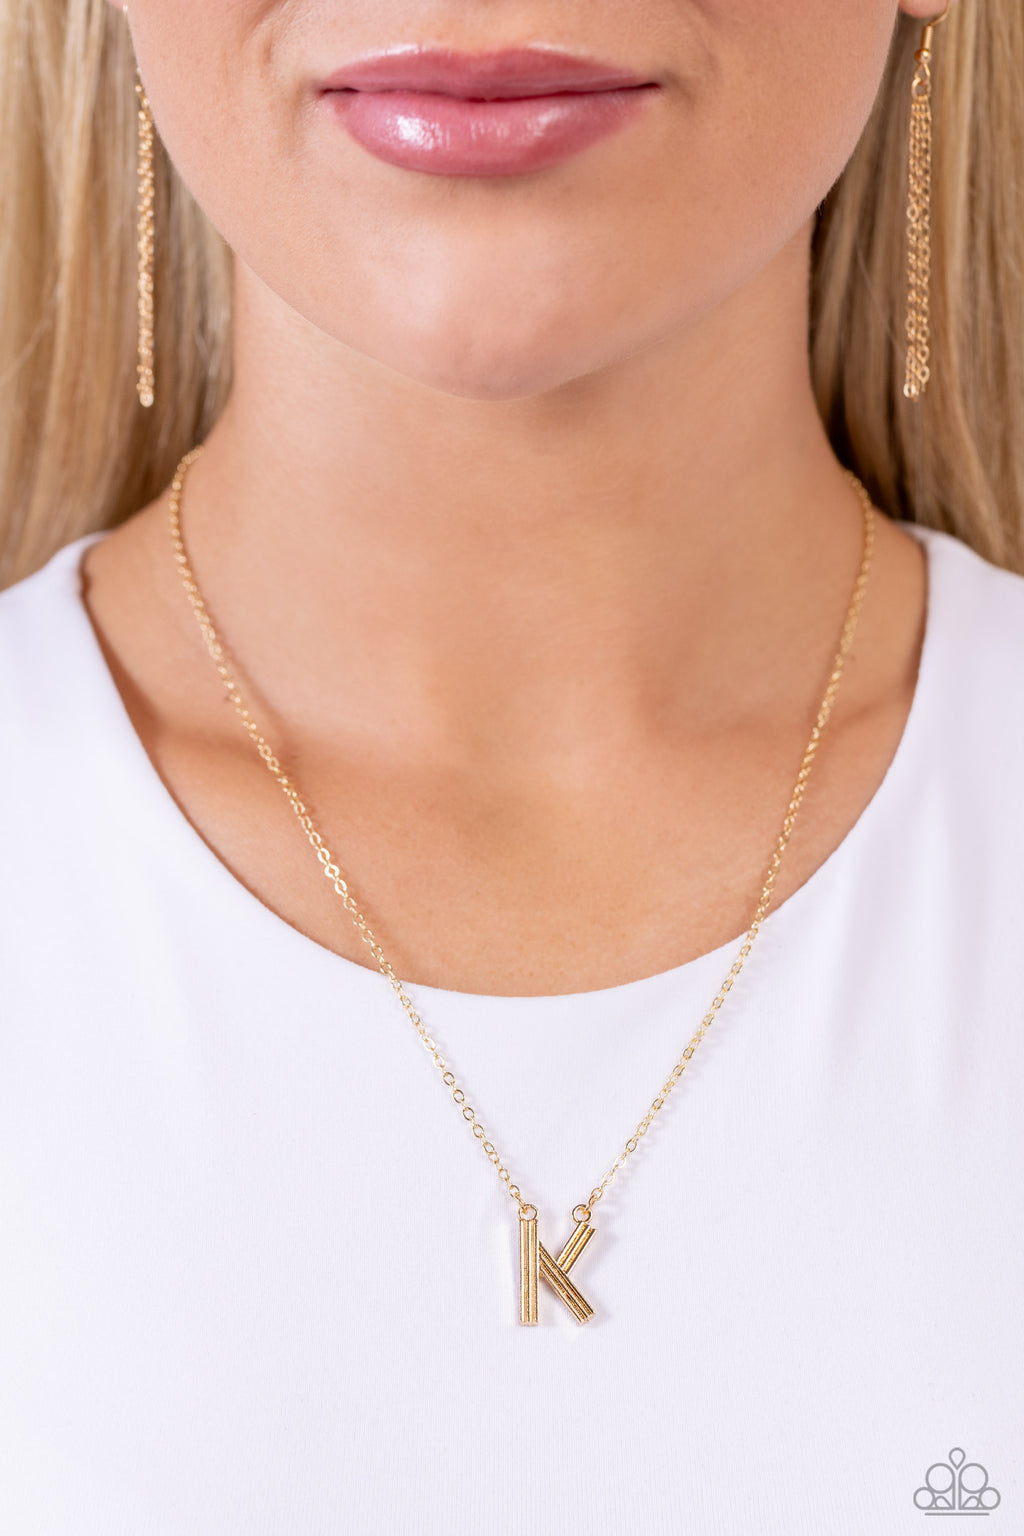 Paparazzi - Leave Your Initials - Gold - K Necklace